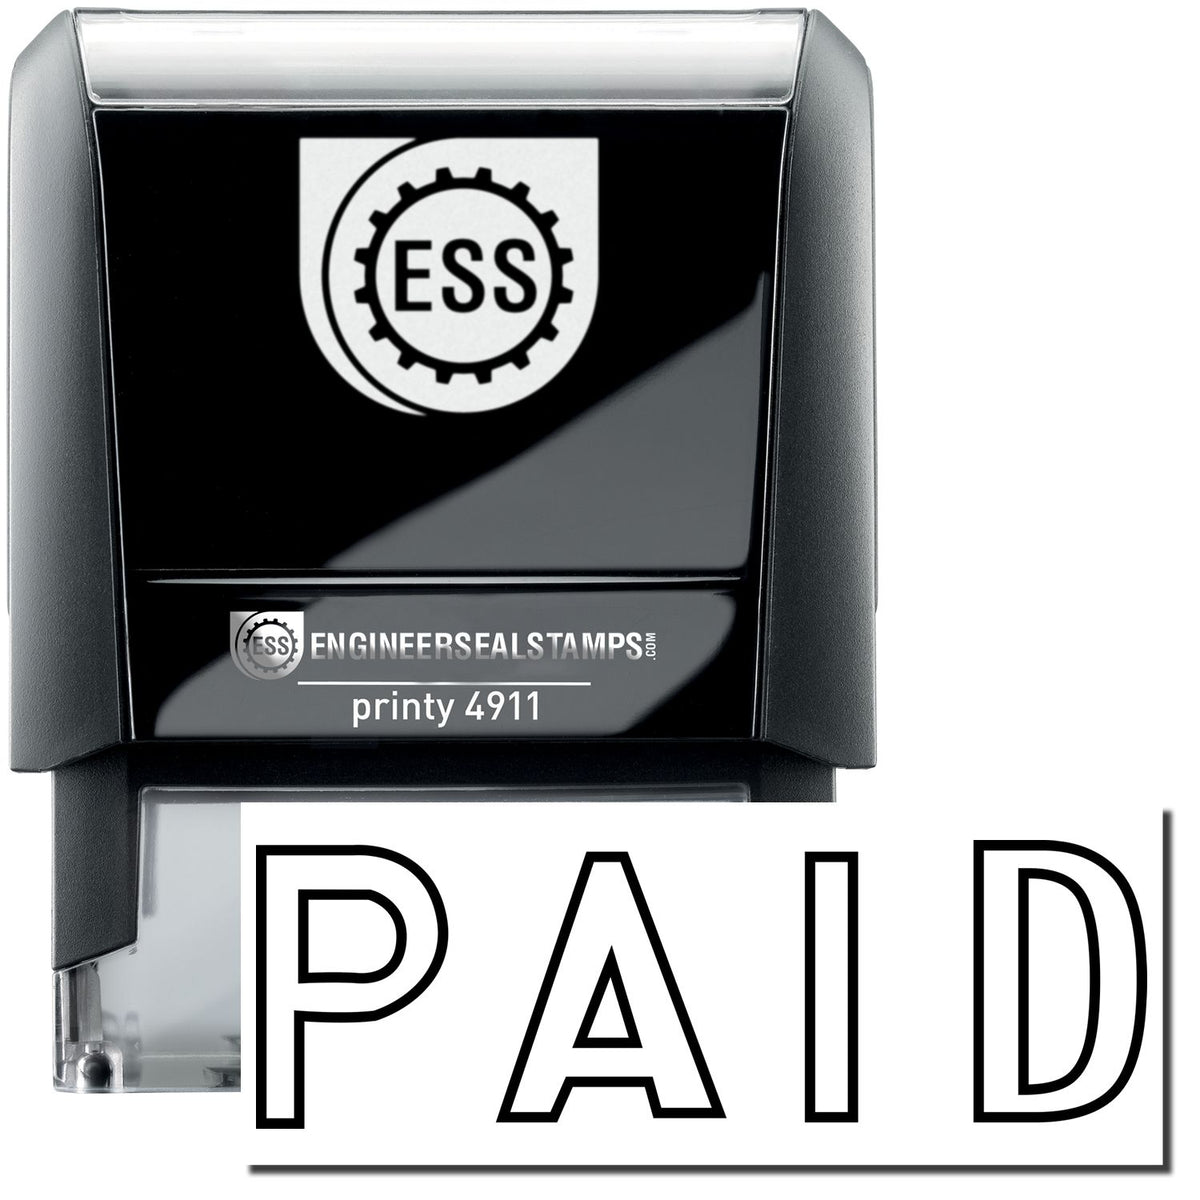 A self-inking stamp with a stamped image showing how the text &quot;PAID&quot; in an outline style is displayed after stamping.